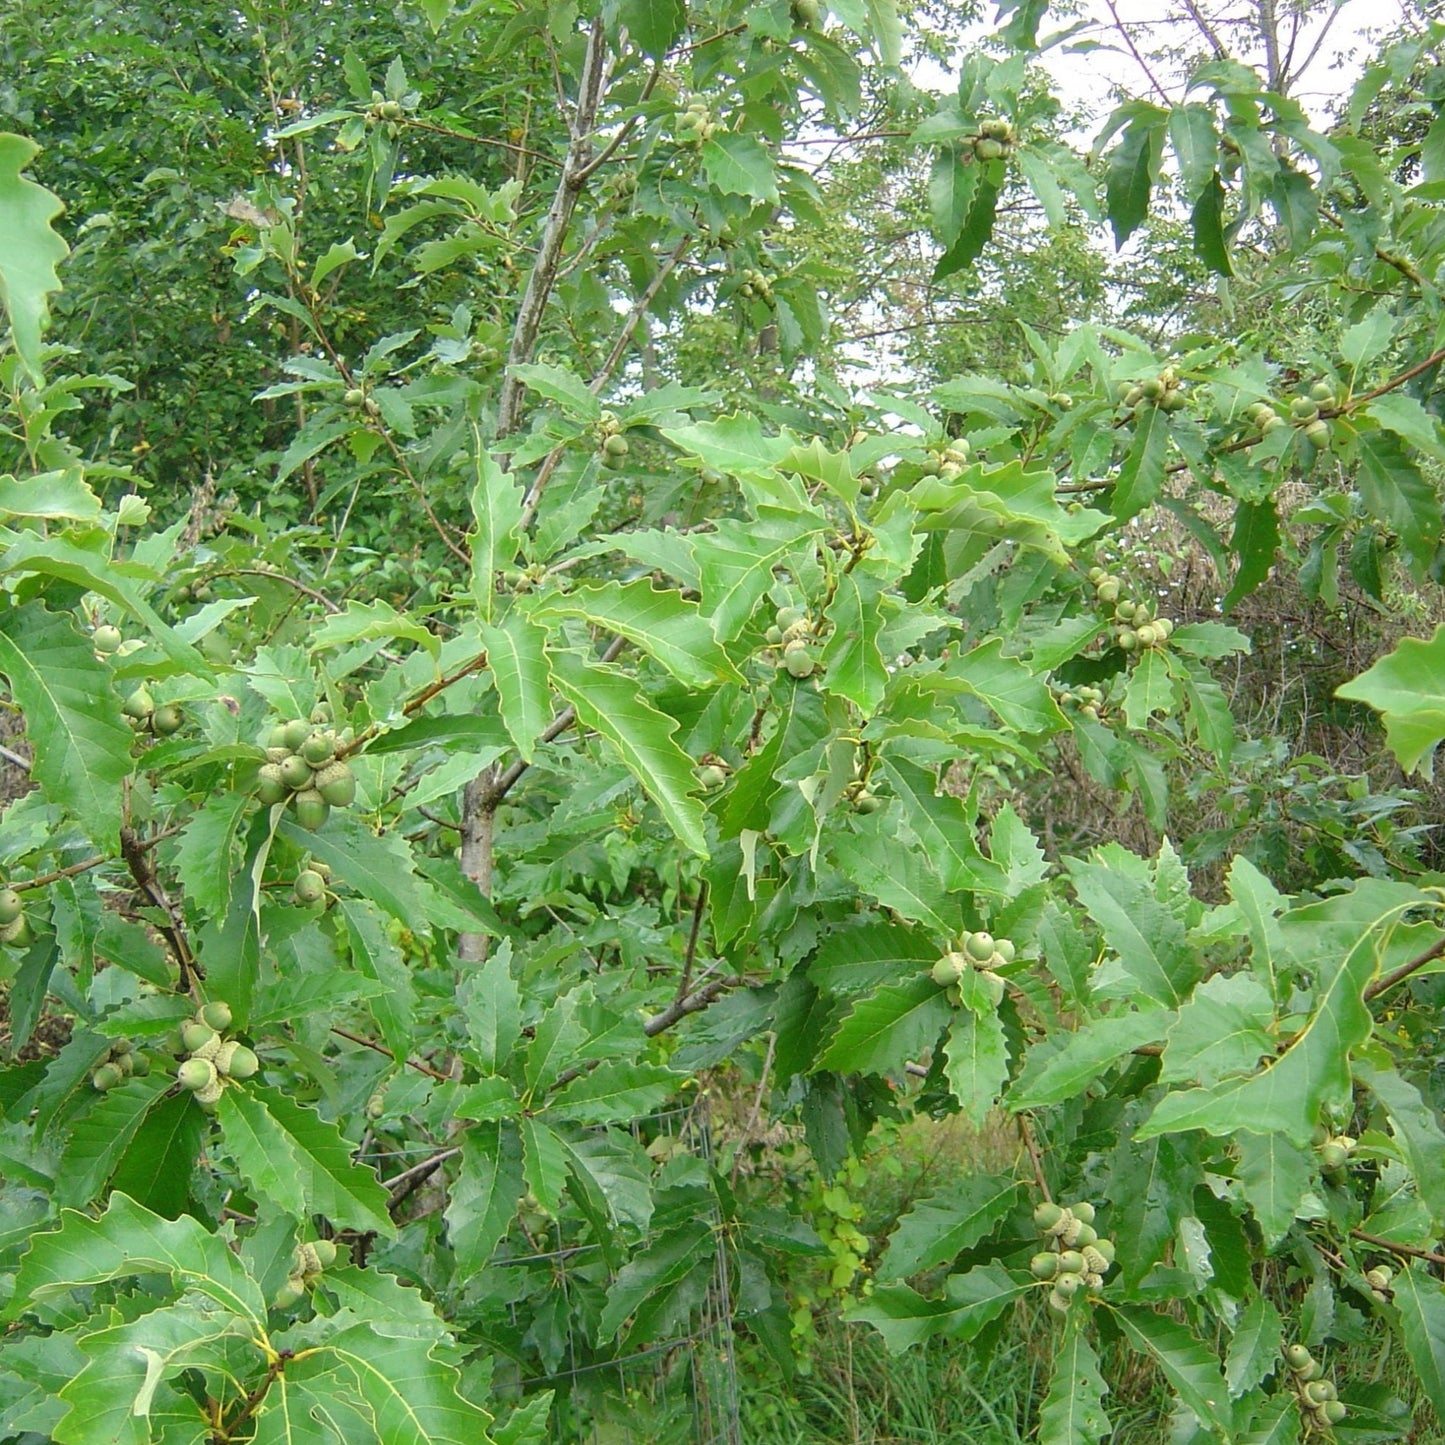 Dwarf Chinkapin Oak is a fast-growing variety of oak tree ideal for food plots and hunting sites. Its sweet acorns are a favorite source of nutrition for deer, turkey, and other wildlife, making it a great choice for wildlife management. It is also popular for small lot development due to its dwarfing characteristics.